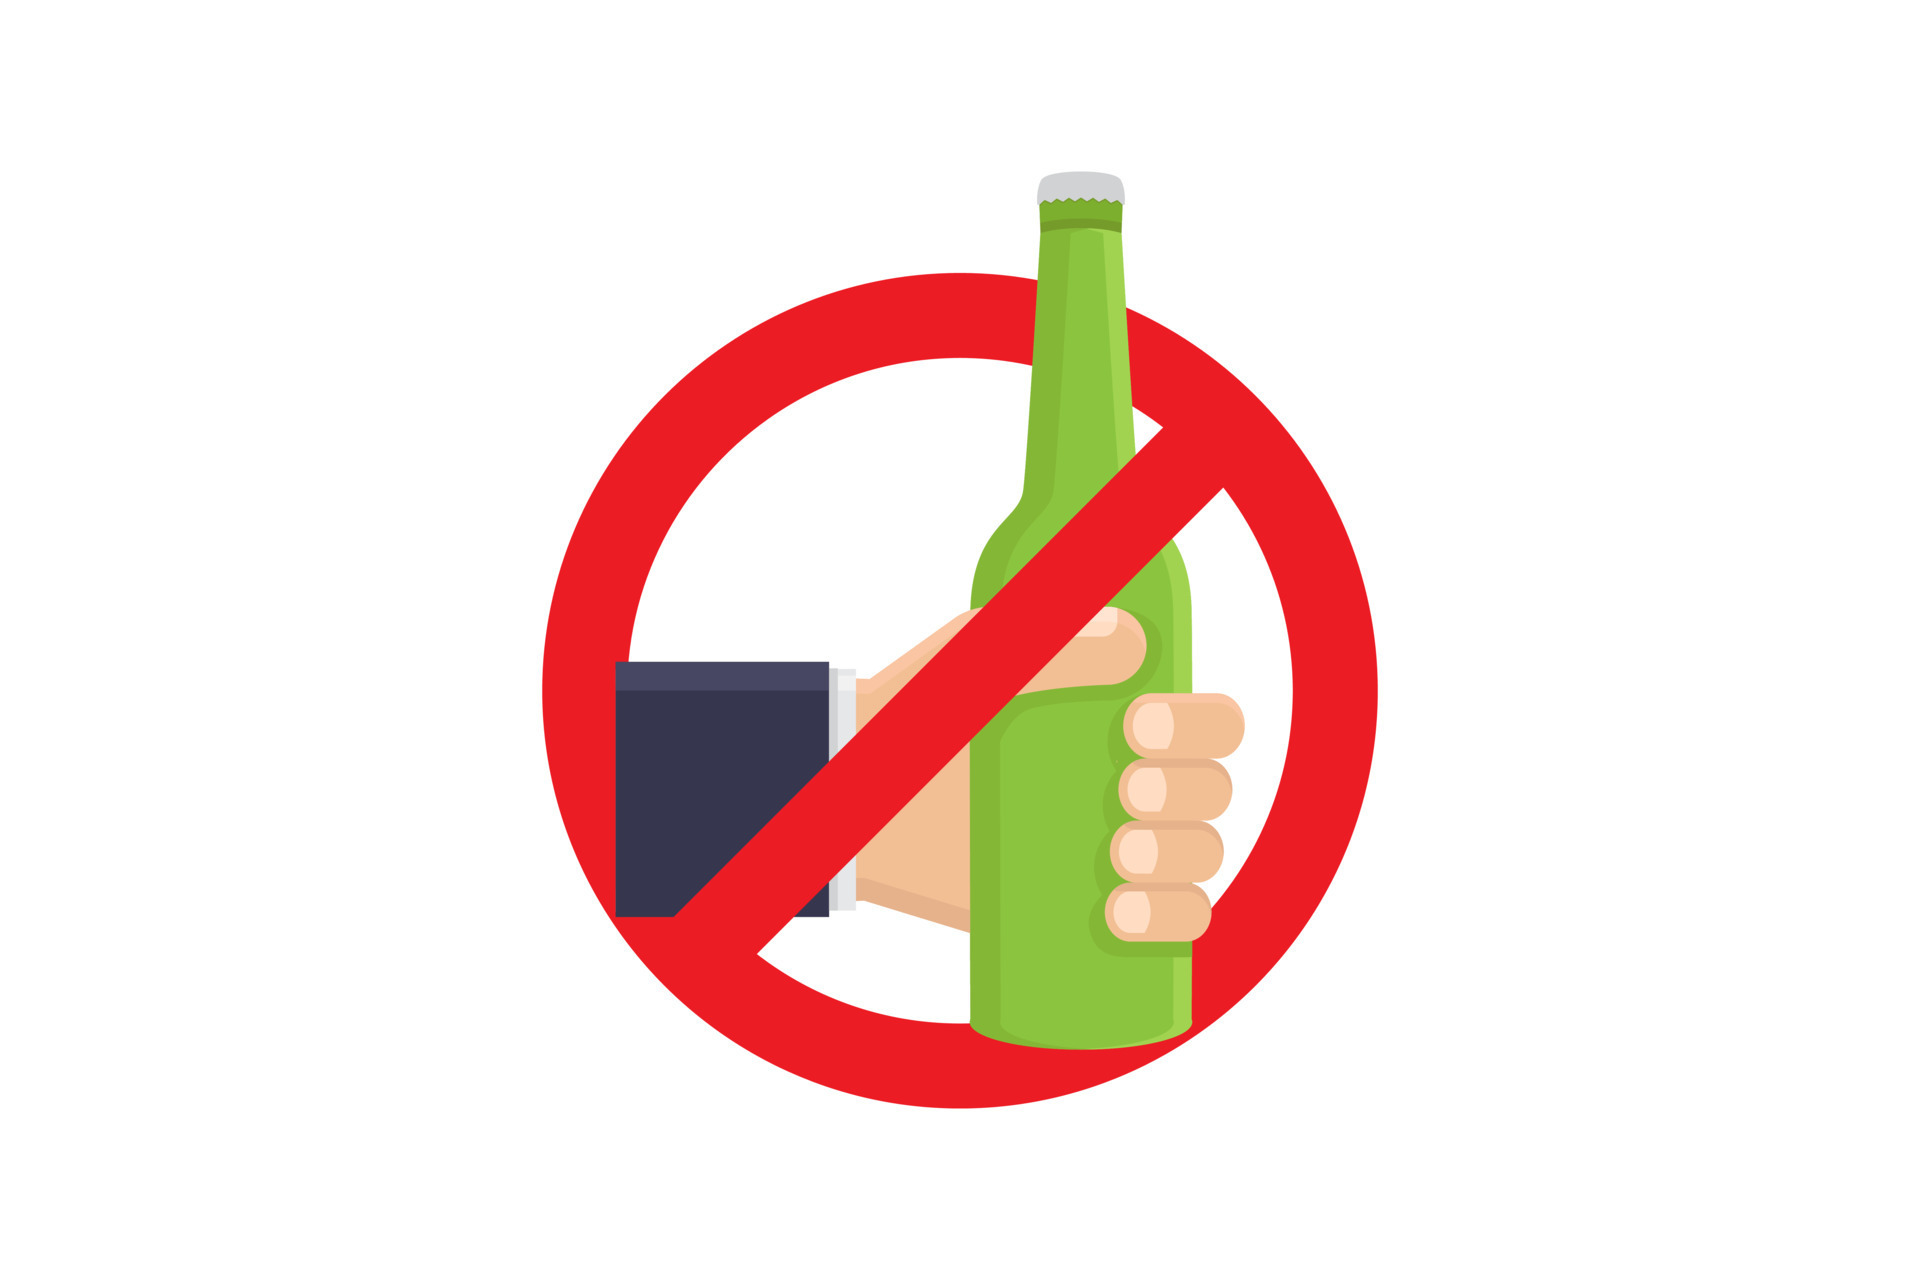 https://static.vecteezy.com/system/resources/previews/022/324/054/original/stop-drinking-alcohol-prohibited-from-drinking-alcohol-design-illustration-vector.jpg